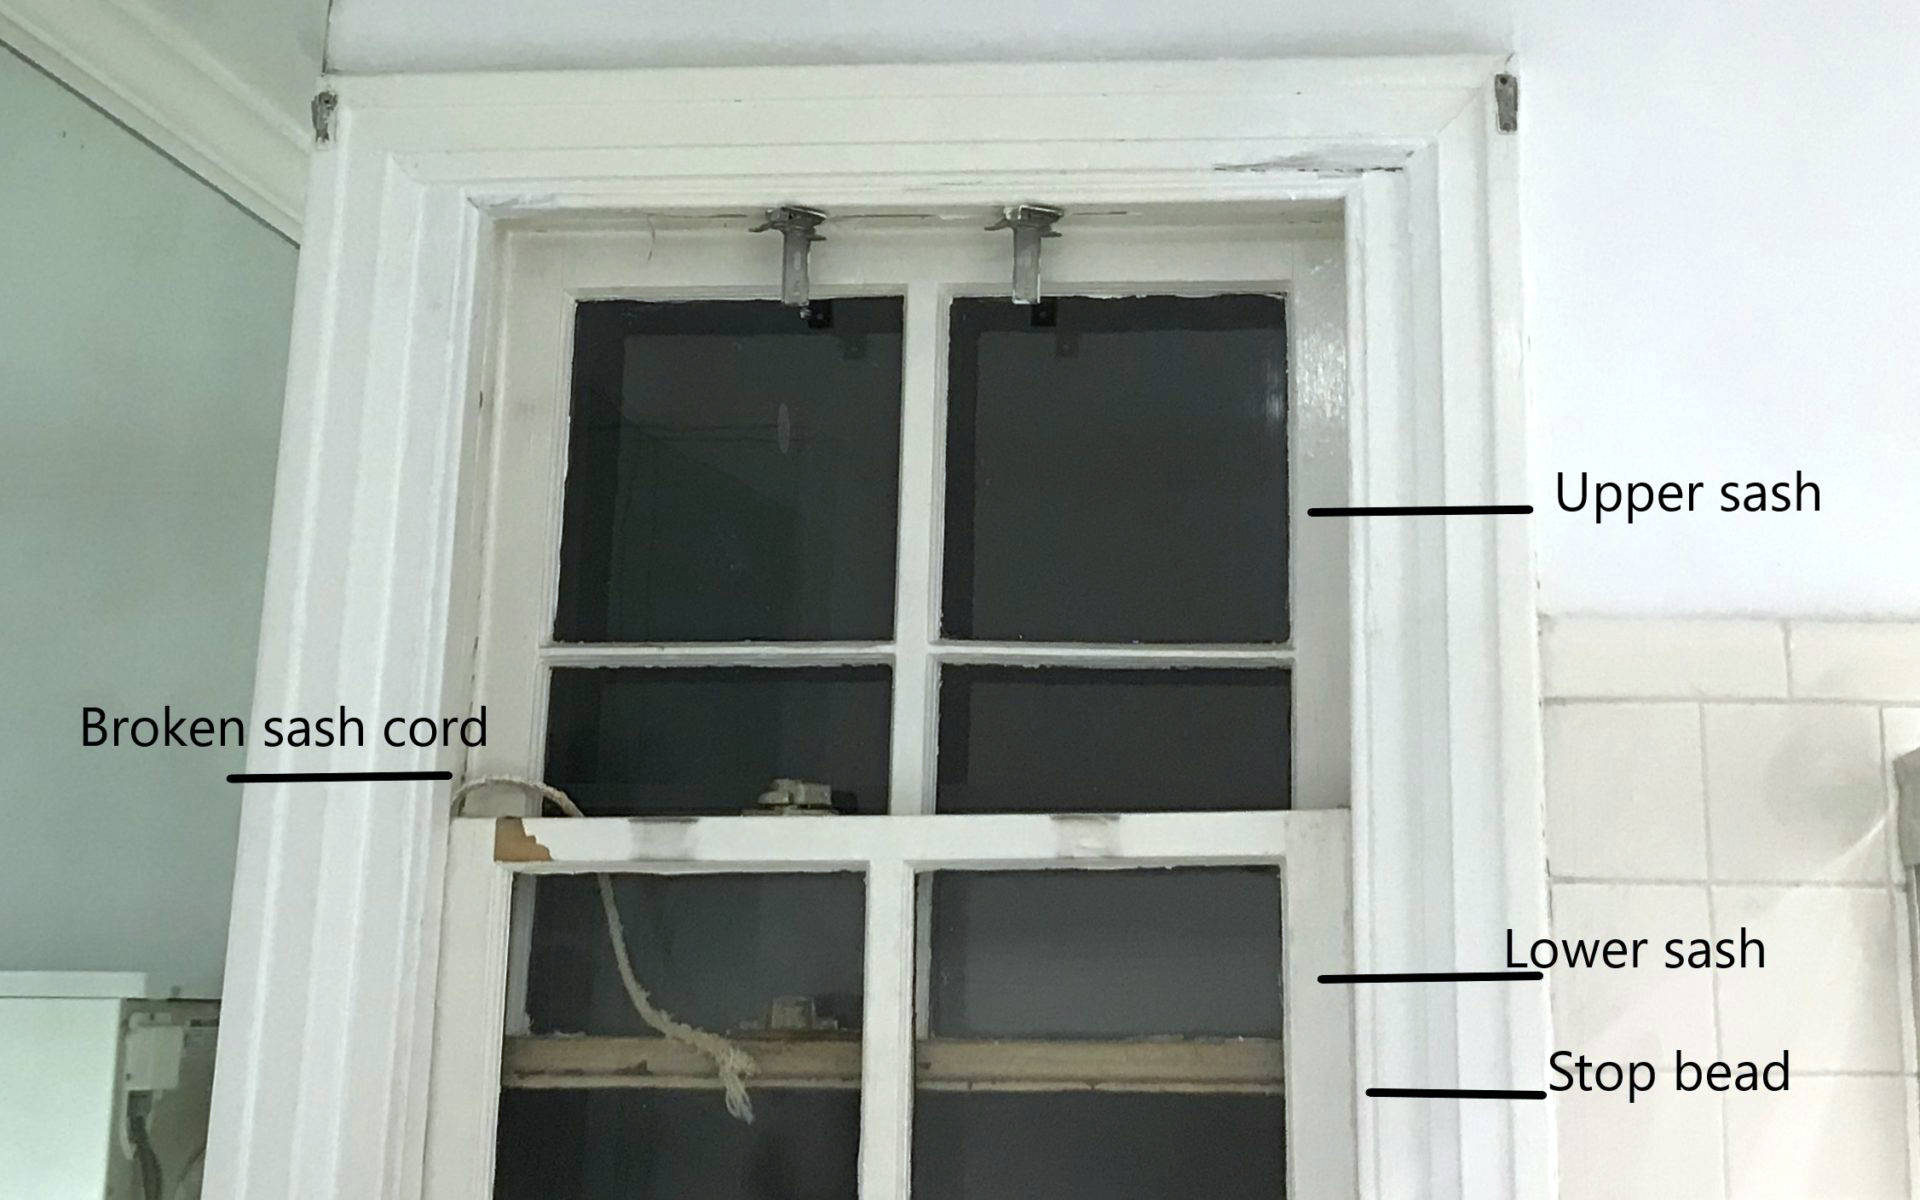 This is how a box sash window is laid out. The bead holds the sash in and the sash cord is hidden within the frame.